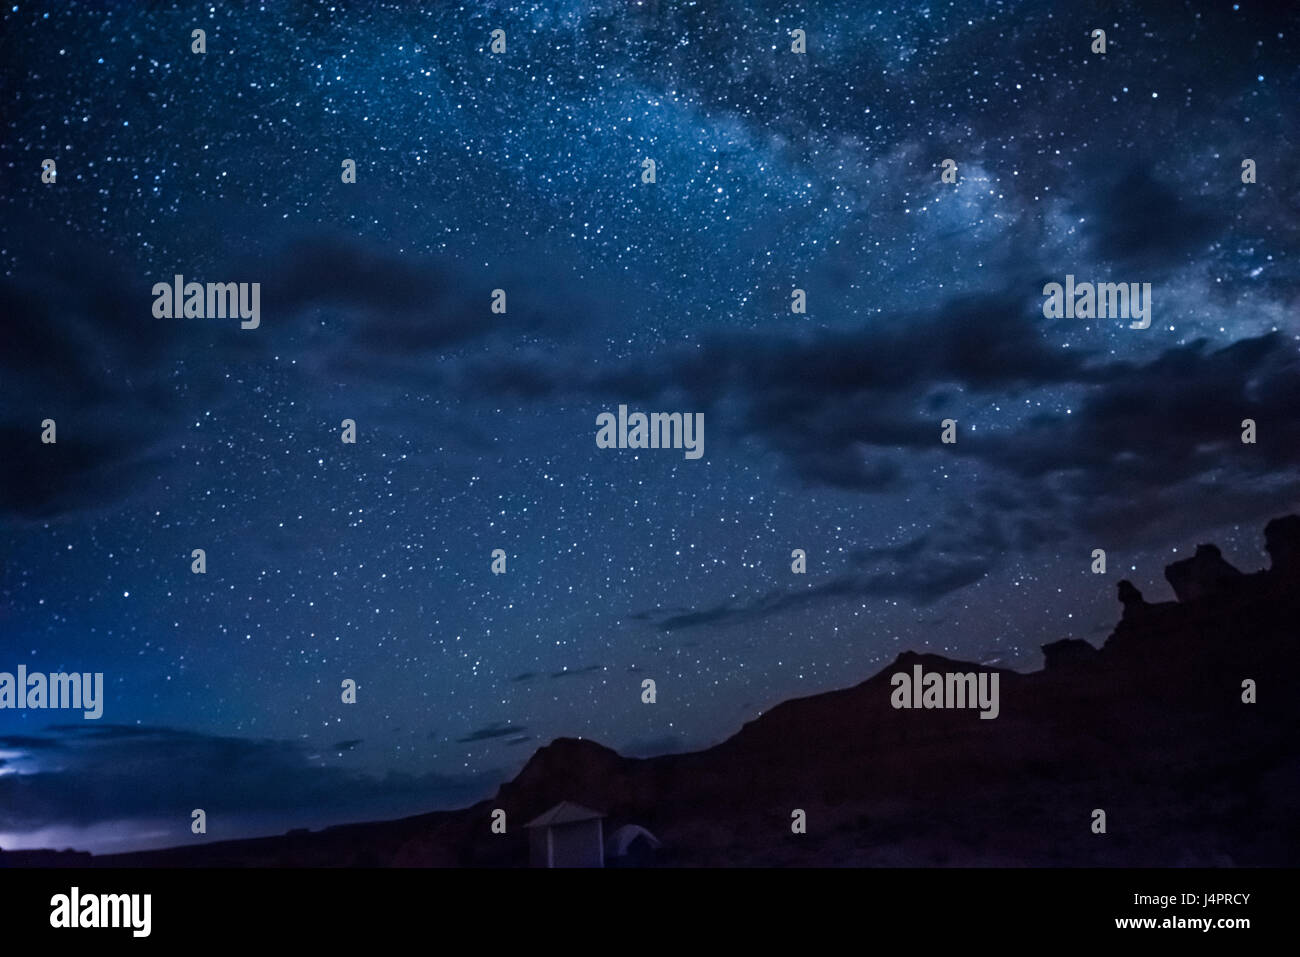 Night sky with milky way, clouds, canyons and campground Stock Photo